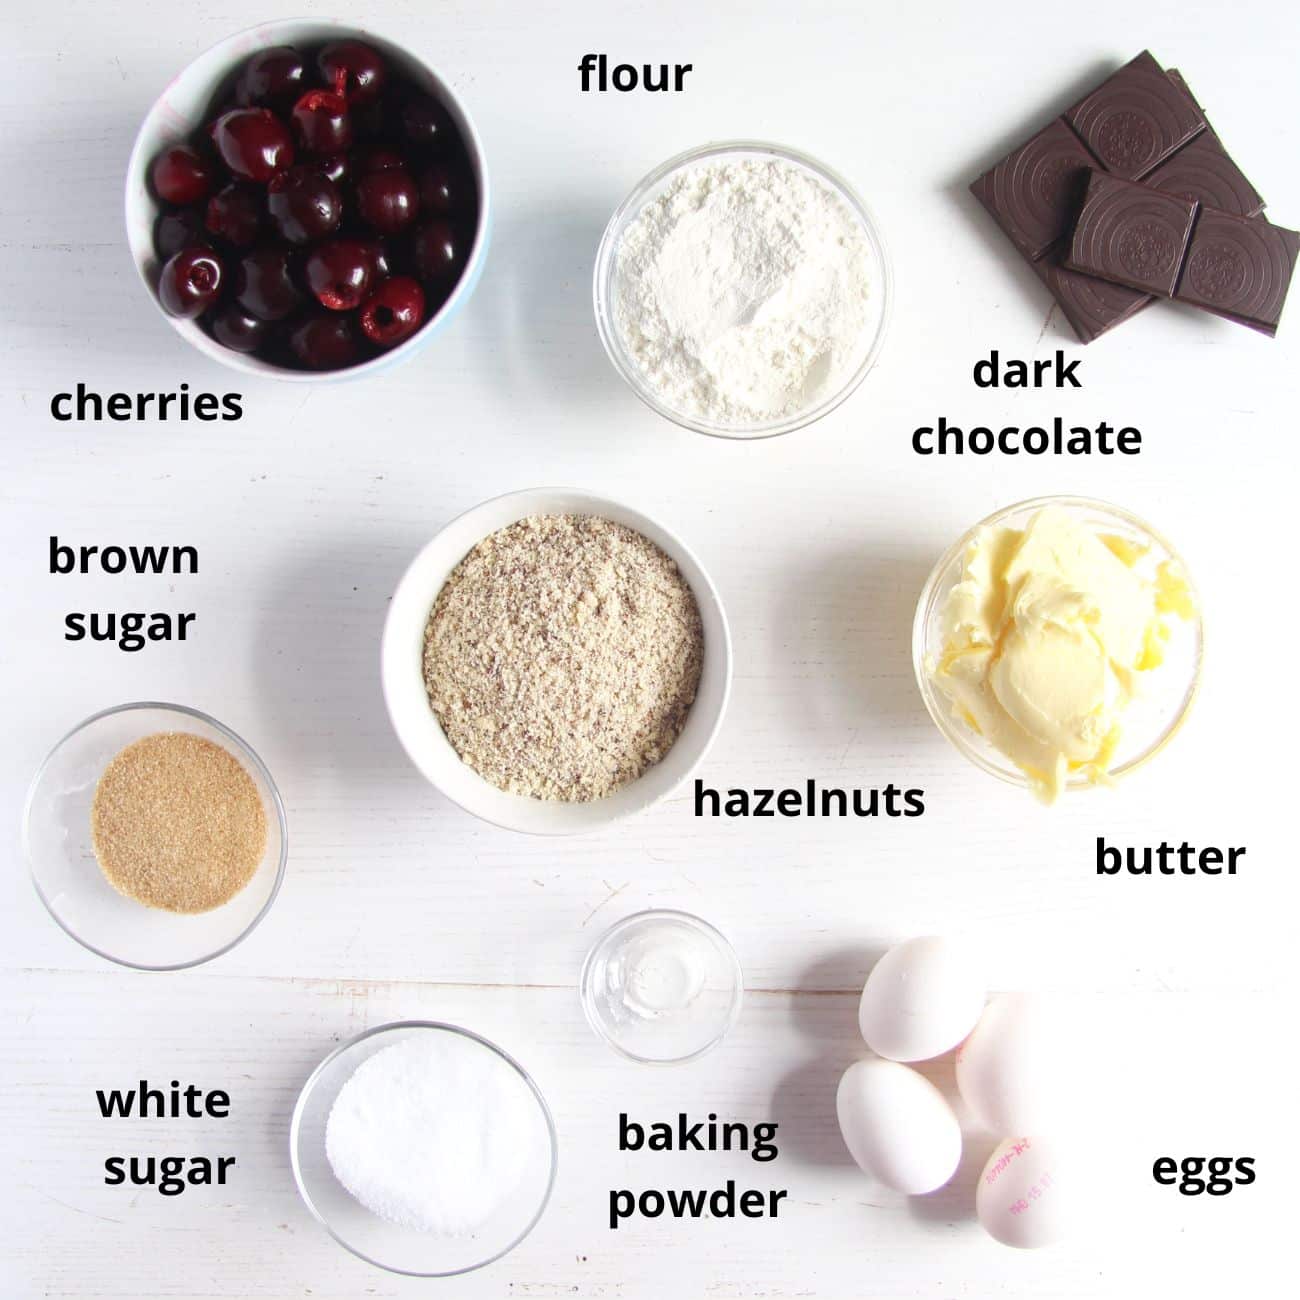 listed ingredients for chocolate cake with cherries.